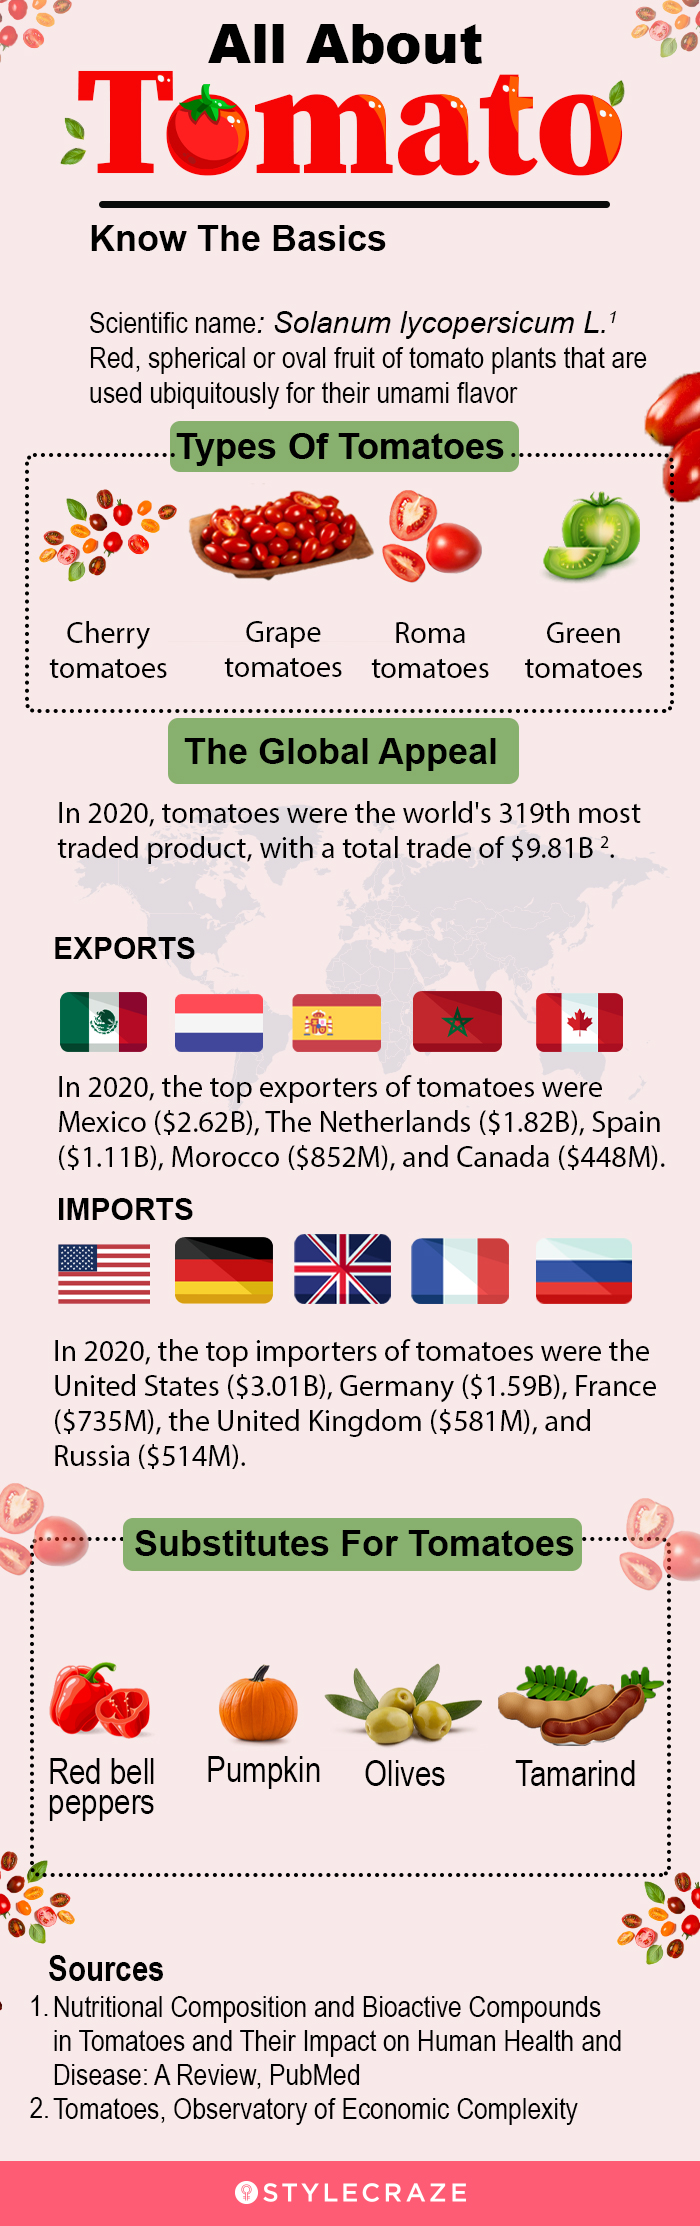 all about tomato (infographic)